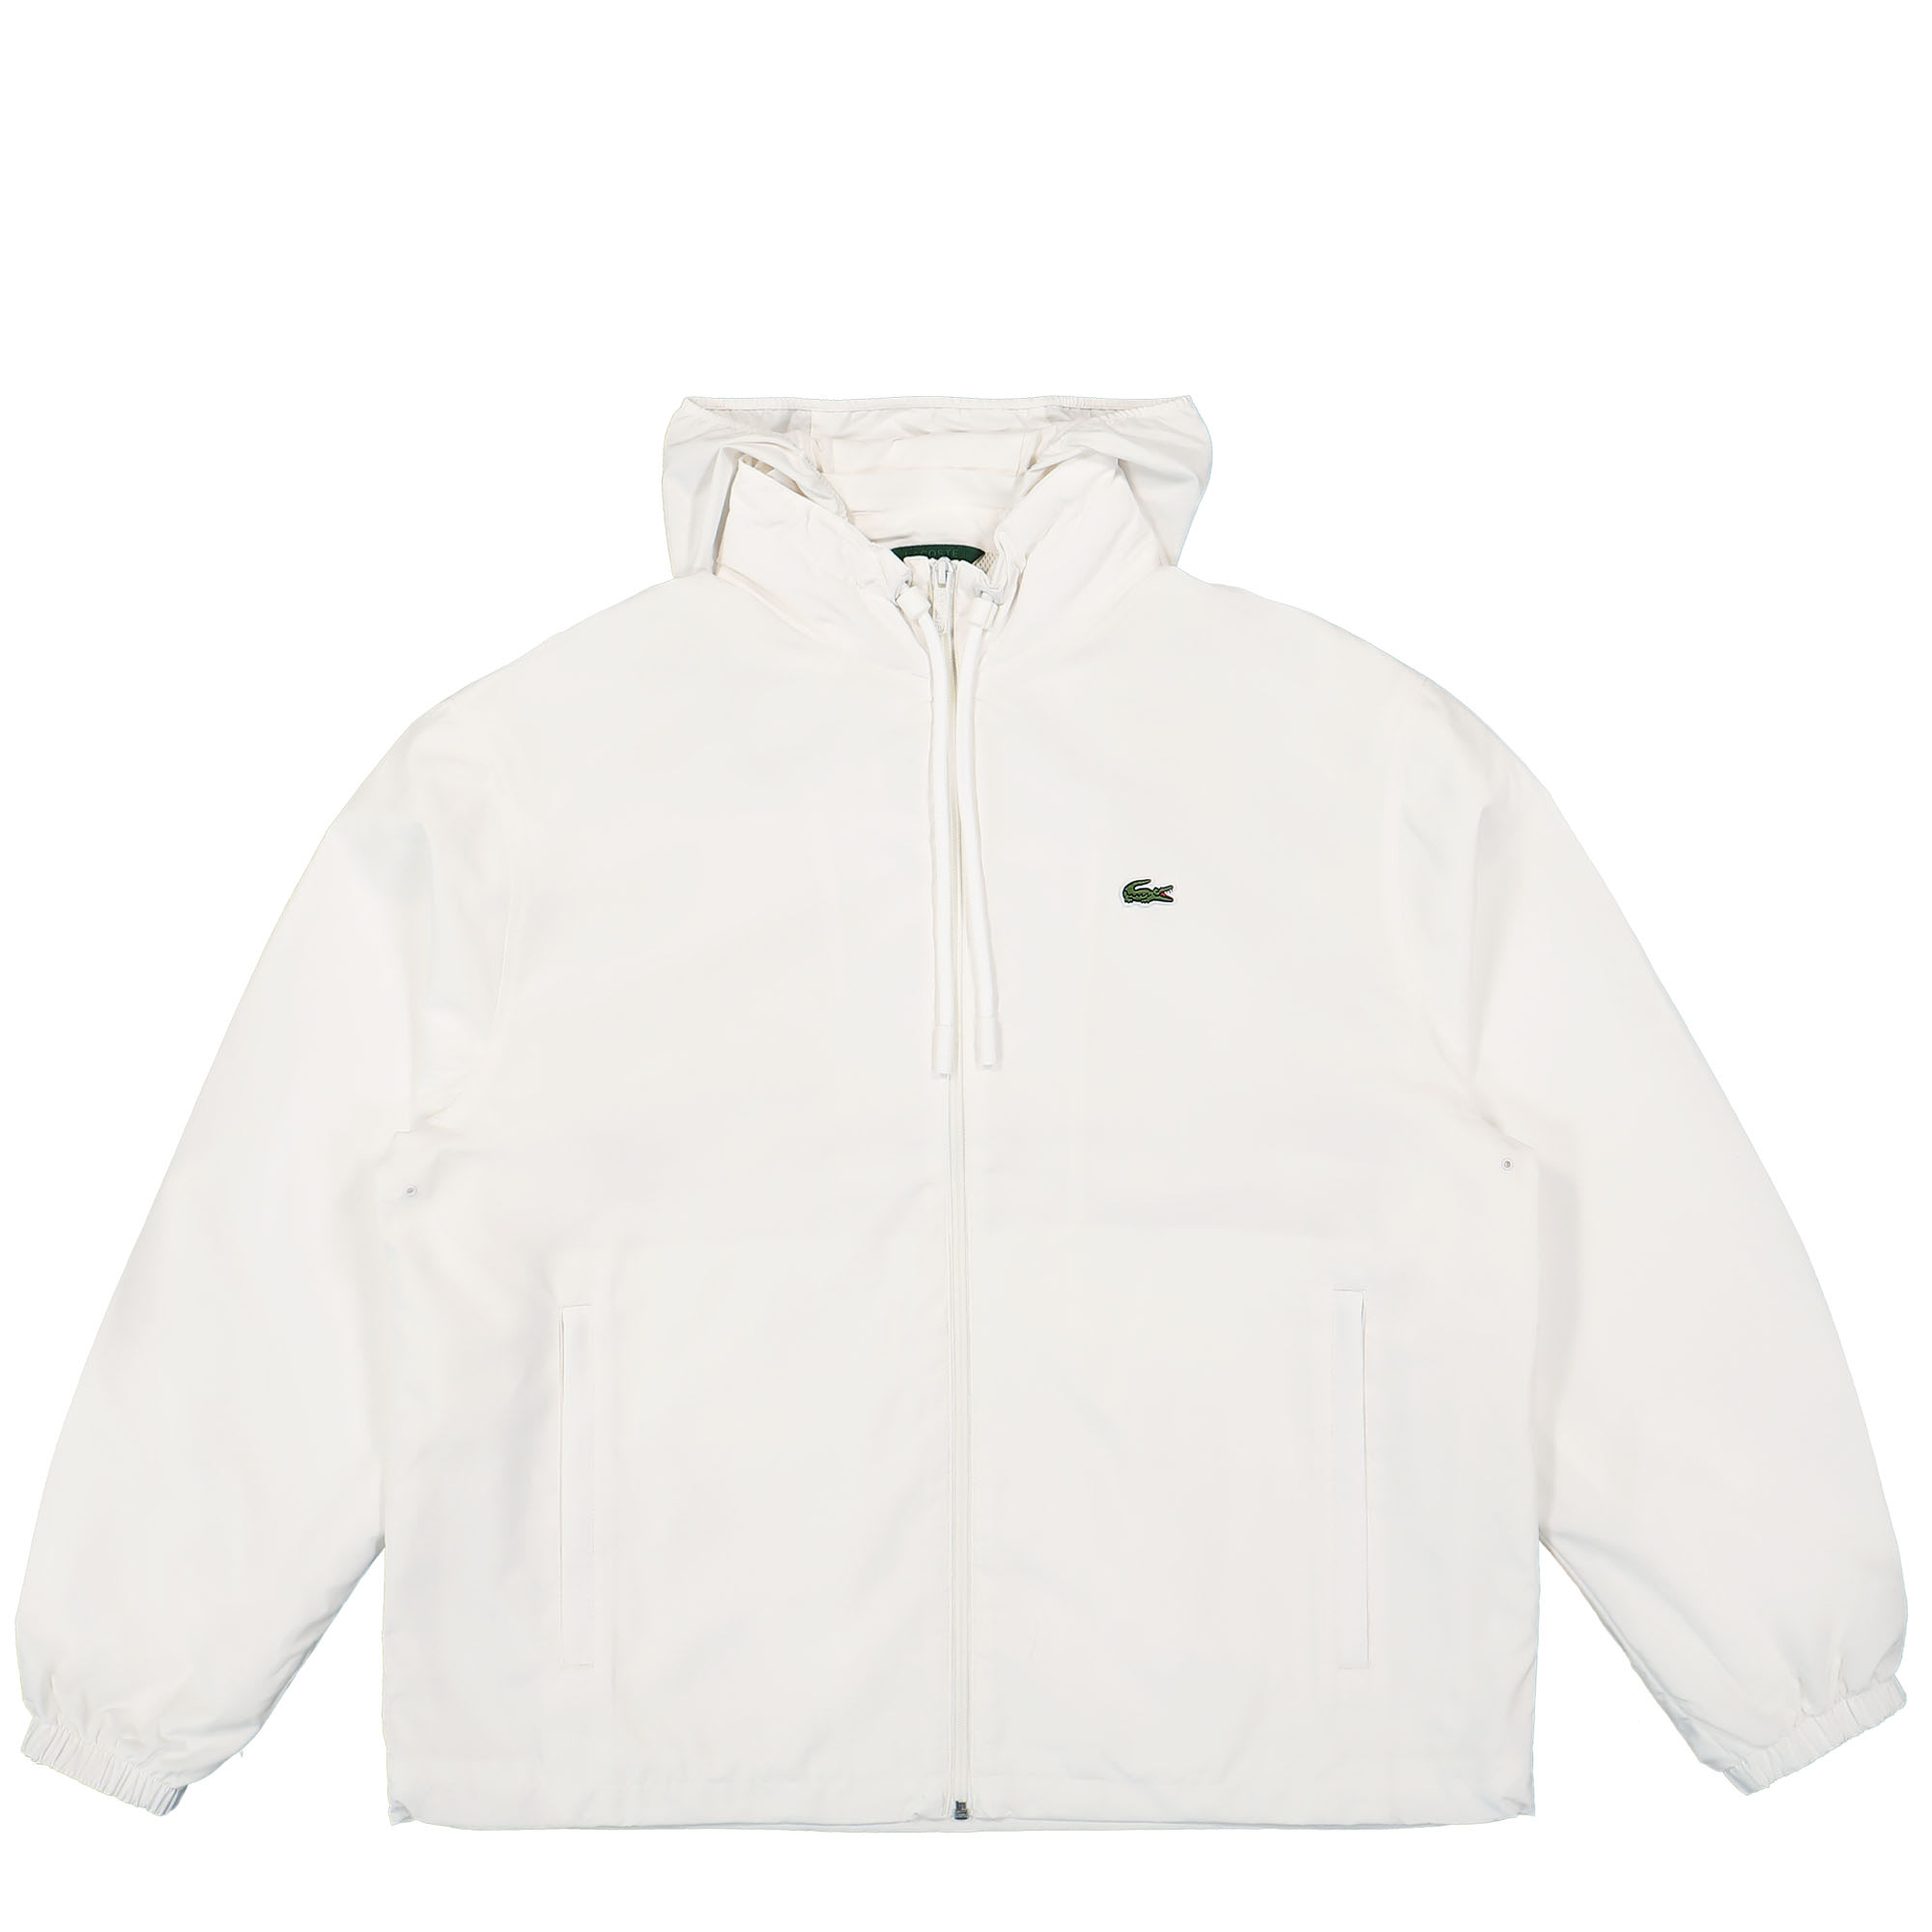 Lacoste - Water-Resistant Sportsuit Jacket | Overkill